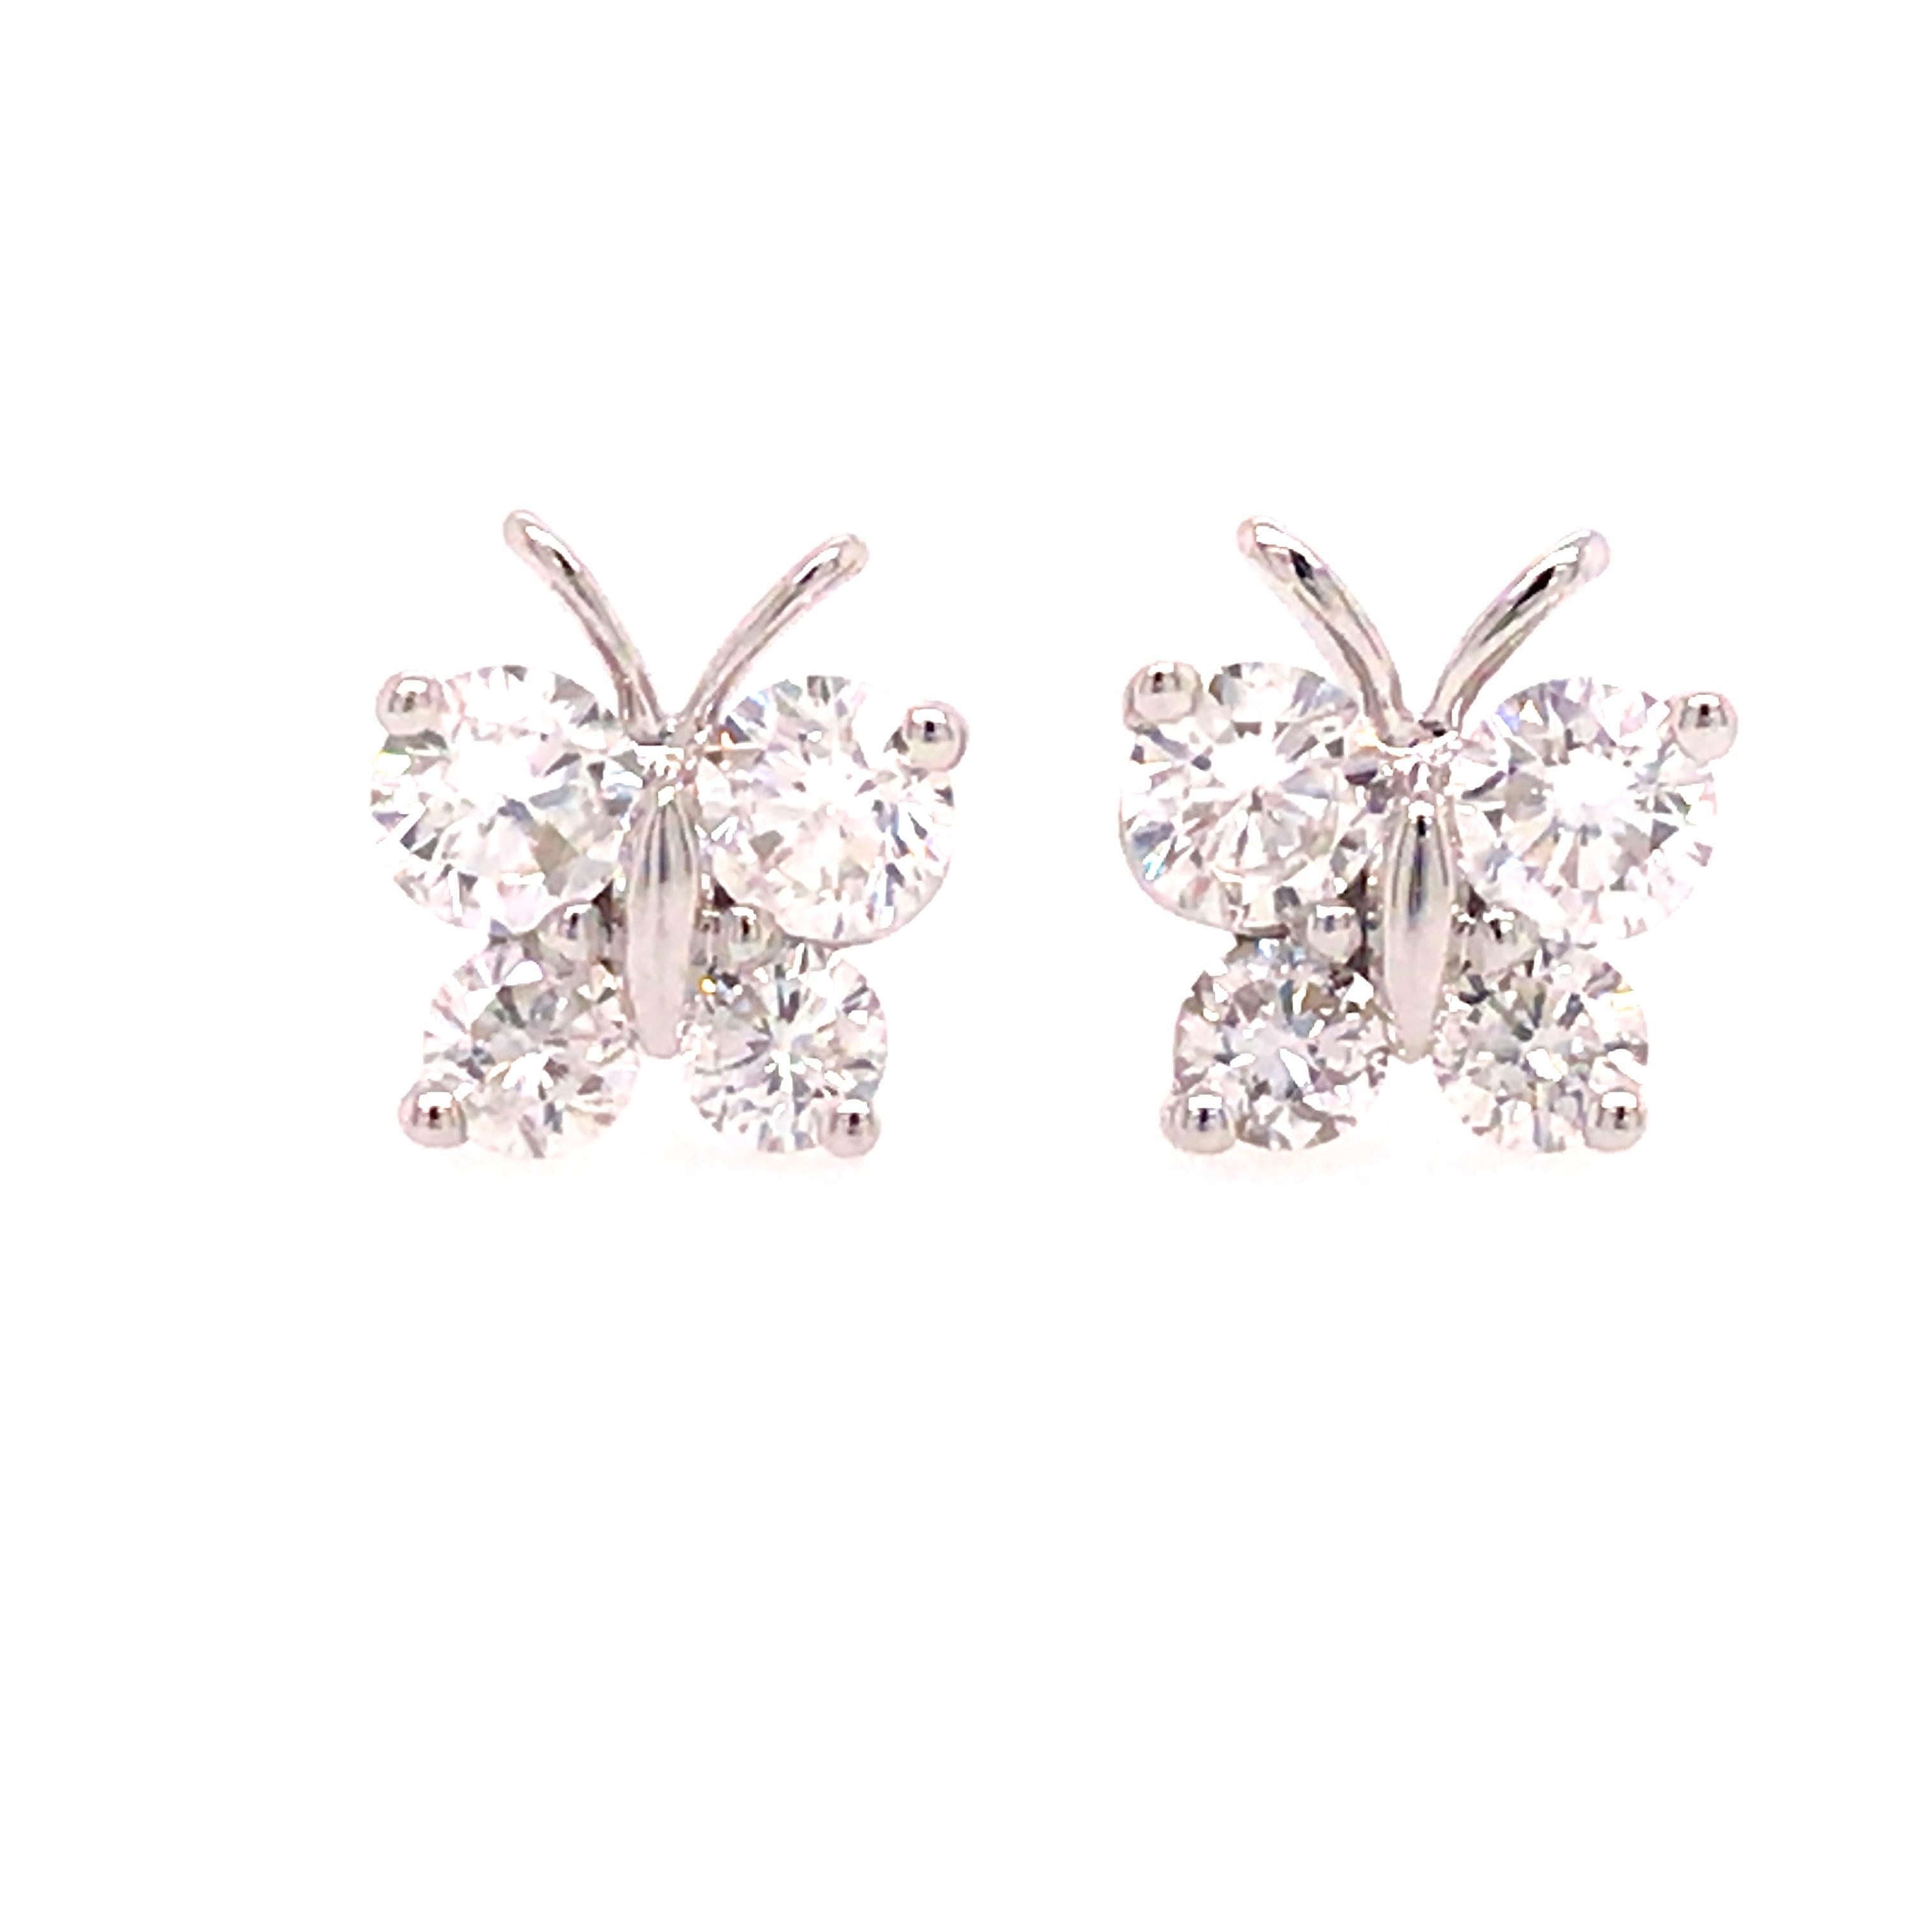 Diamond Butterfly Earrings in 14K White Gold.  (8) Round Brilliant Cut Diamonds weighing 0.52 carat total weight, G-H in color and VS in clarity are expertly set.  The Earrings measure 1/4 inch in length and width. 1.86 grams.